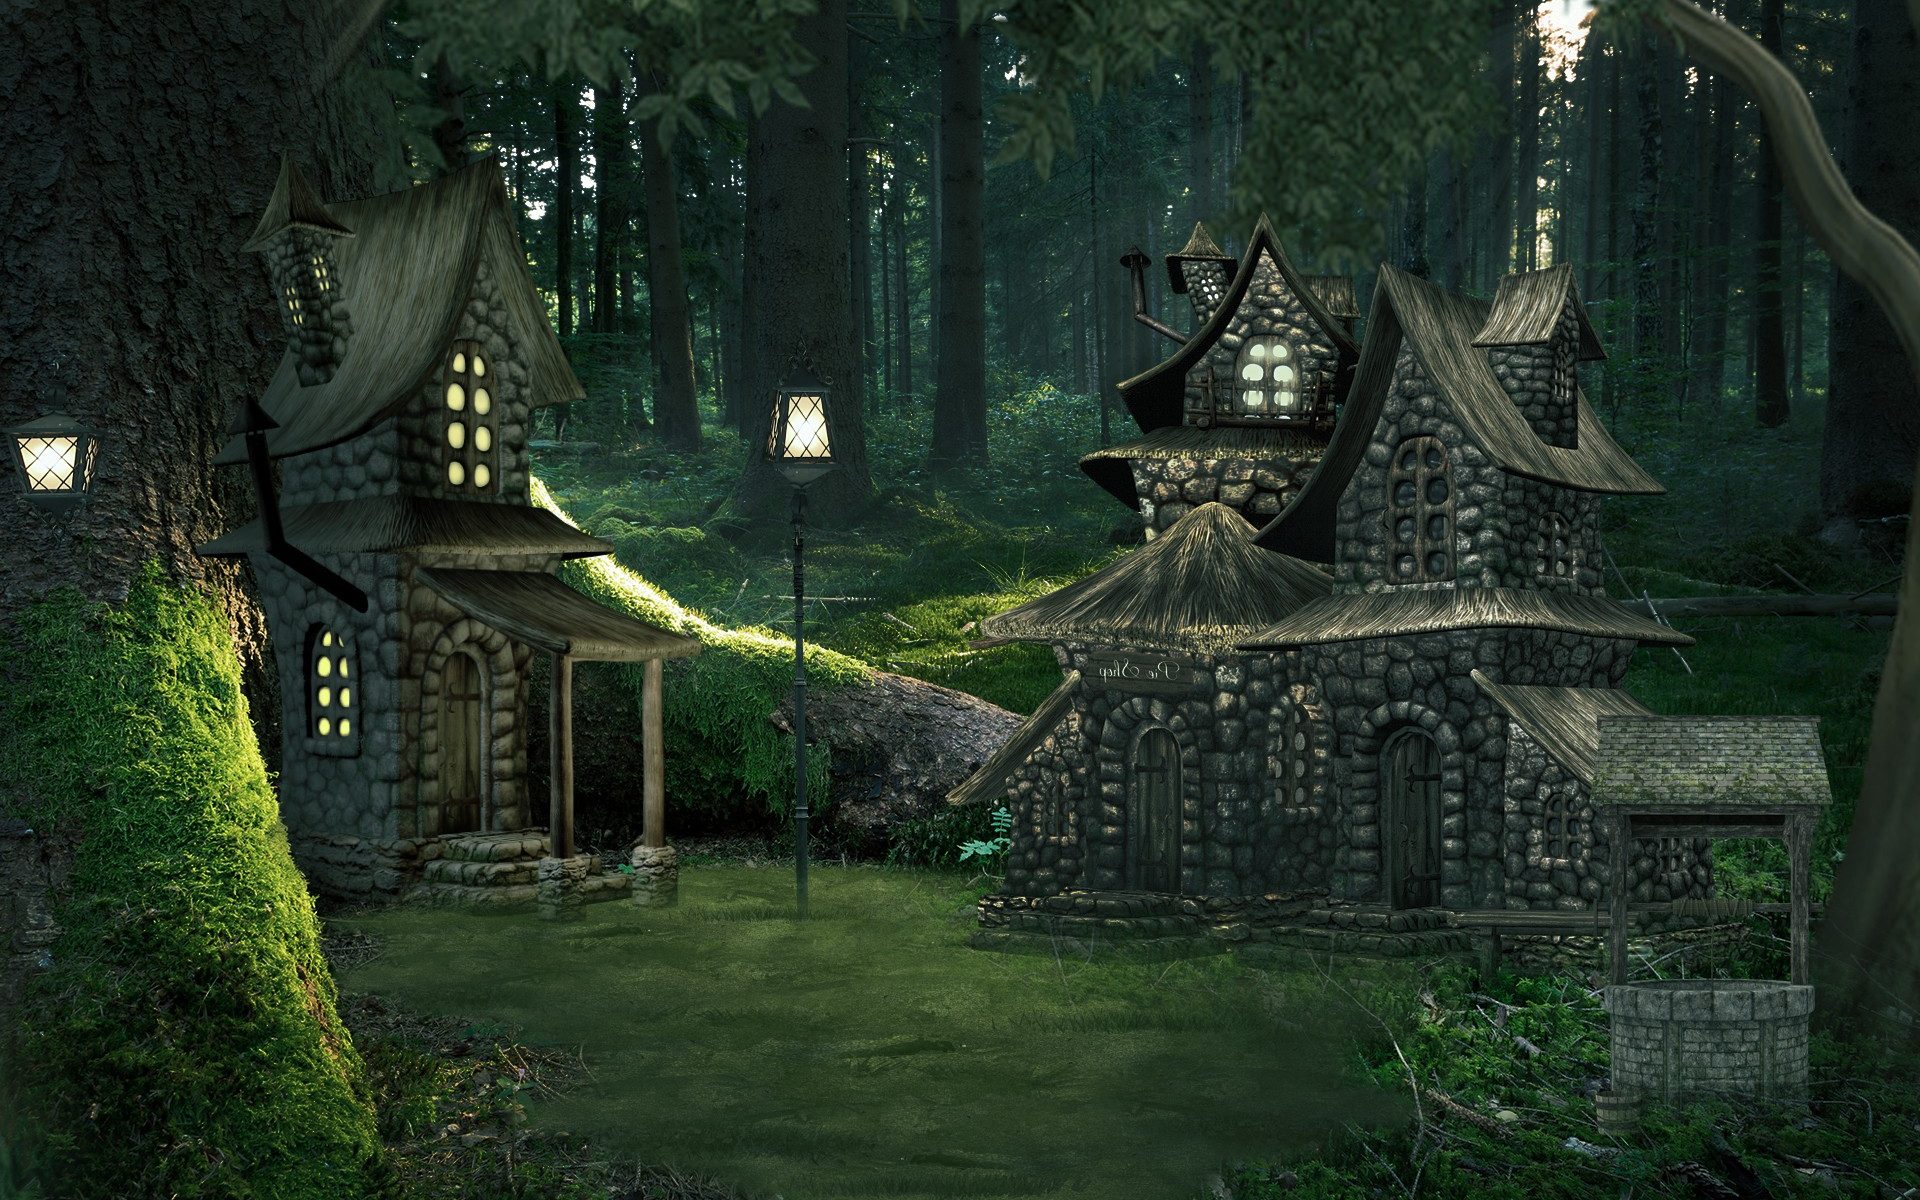 Cottages in Enchanted Forest by H-stock